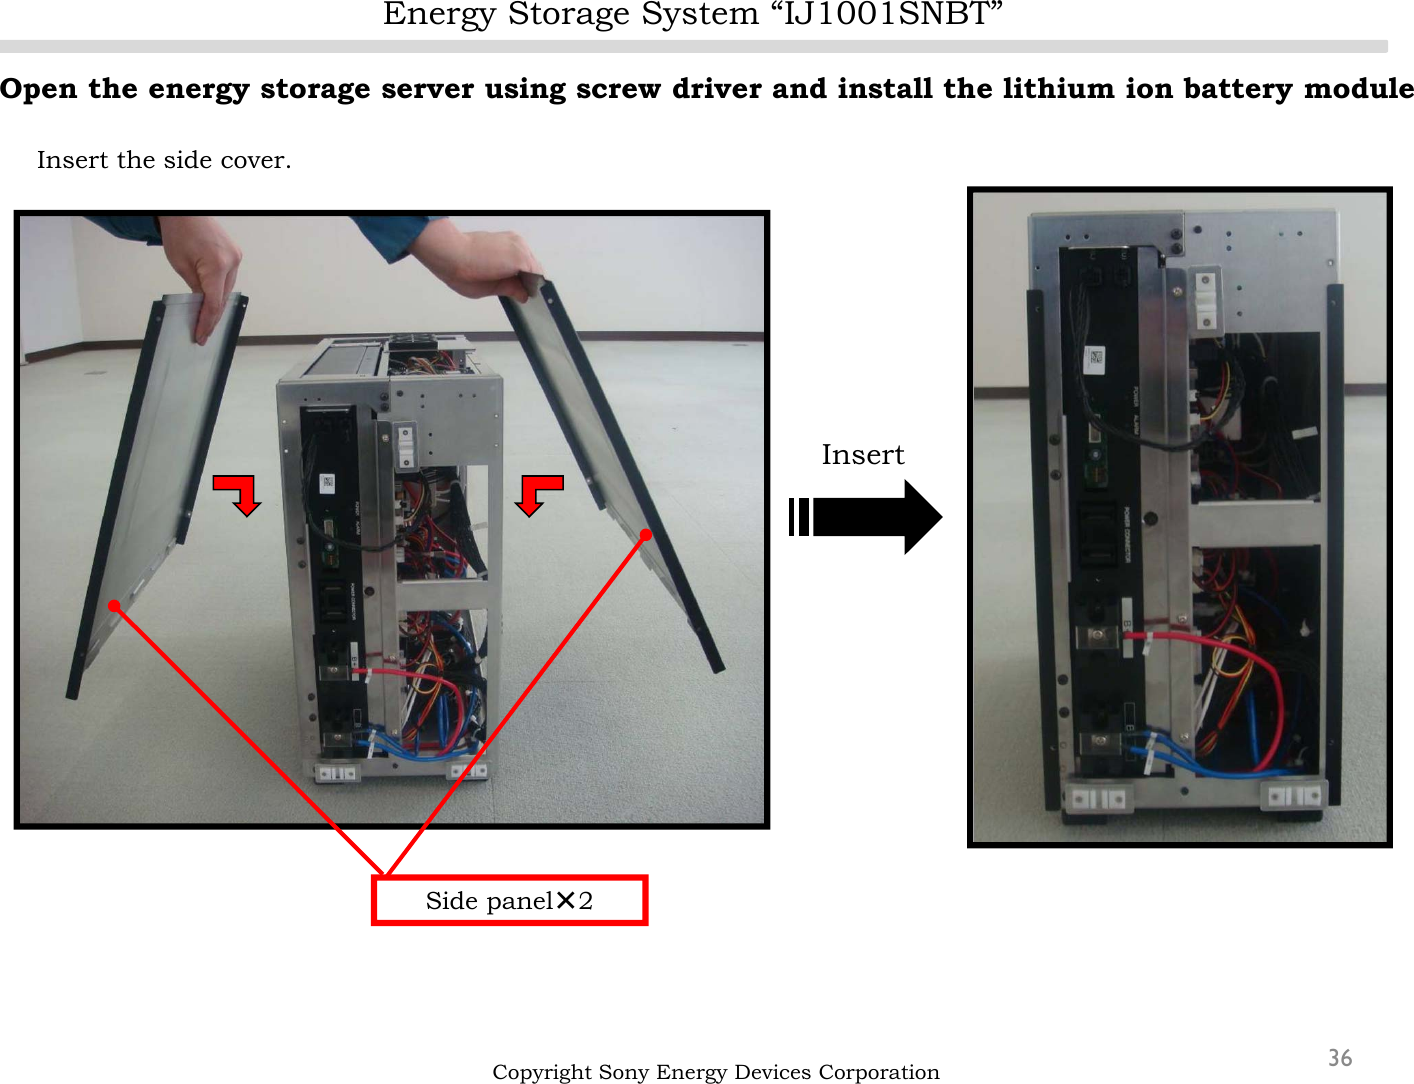 Energy Storage System “IJ1001SNBT”36Open the energy storage server using screw driver and install the lithium ion battery moduleInsert the side cover.Copyright Sony Energy Devices CorporationSide panel×2Insert